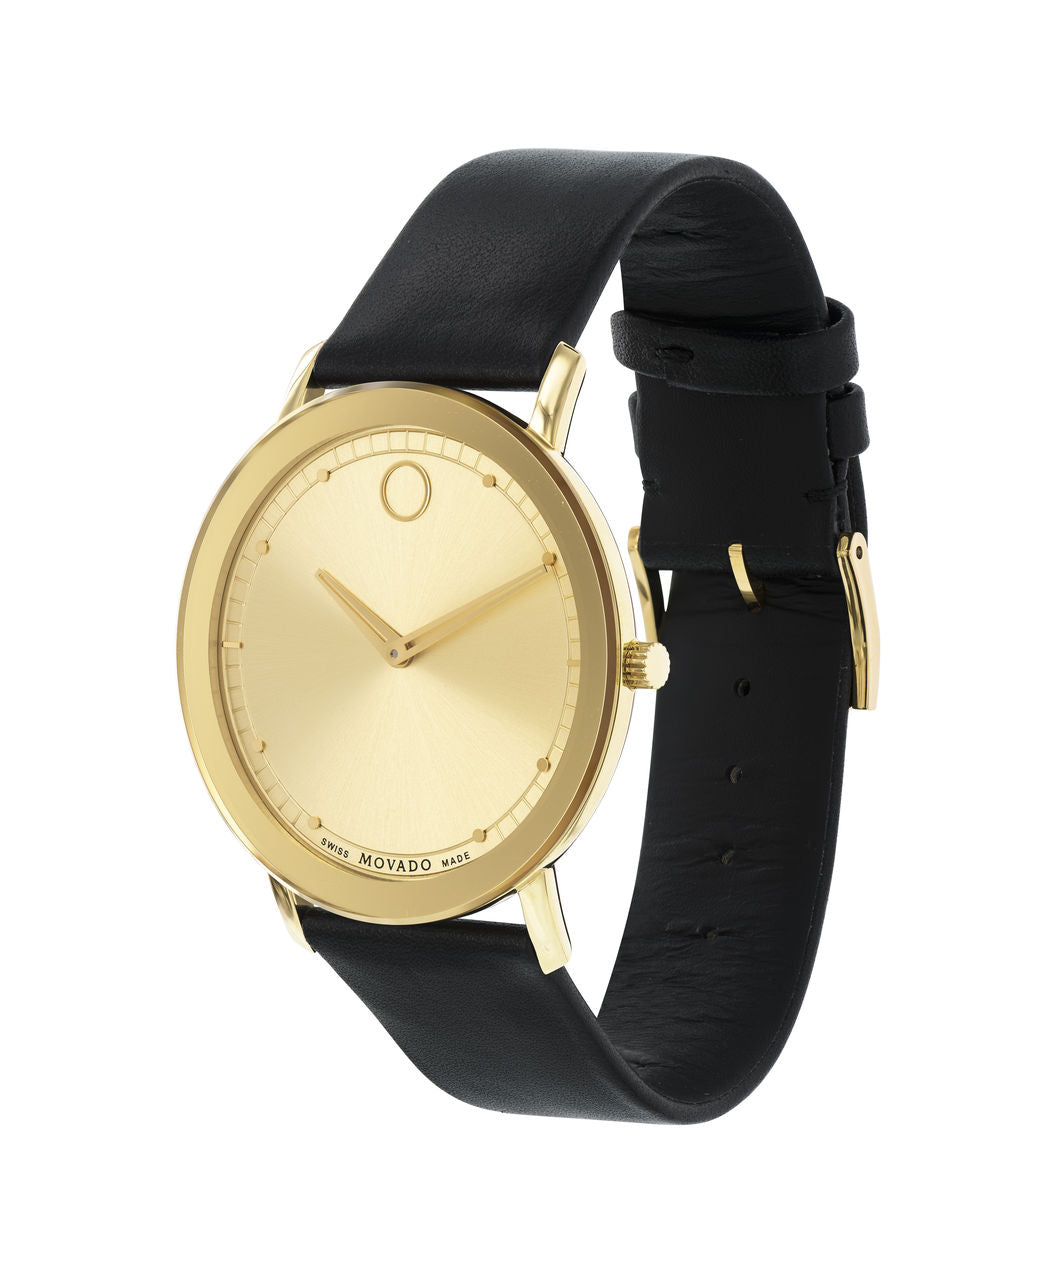 Movado Watch Sapphire Collection - Gold PVD on Black Leather